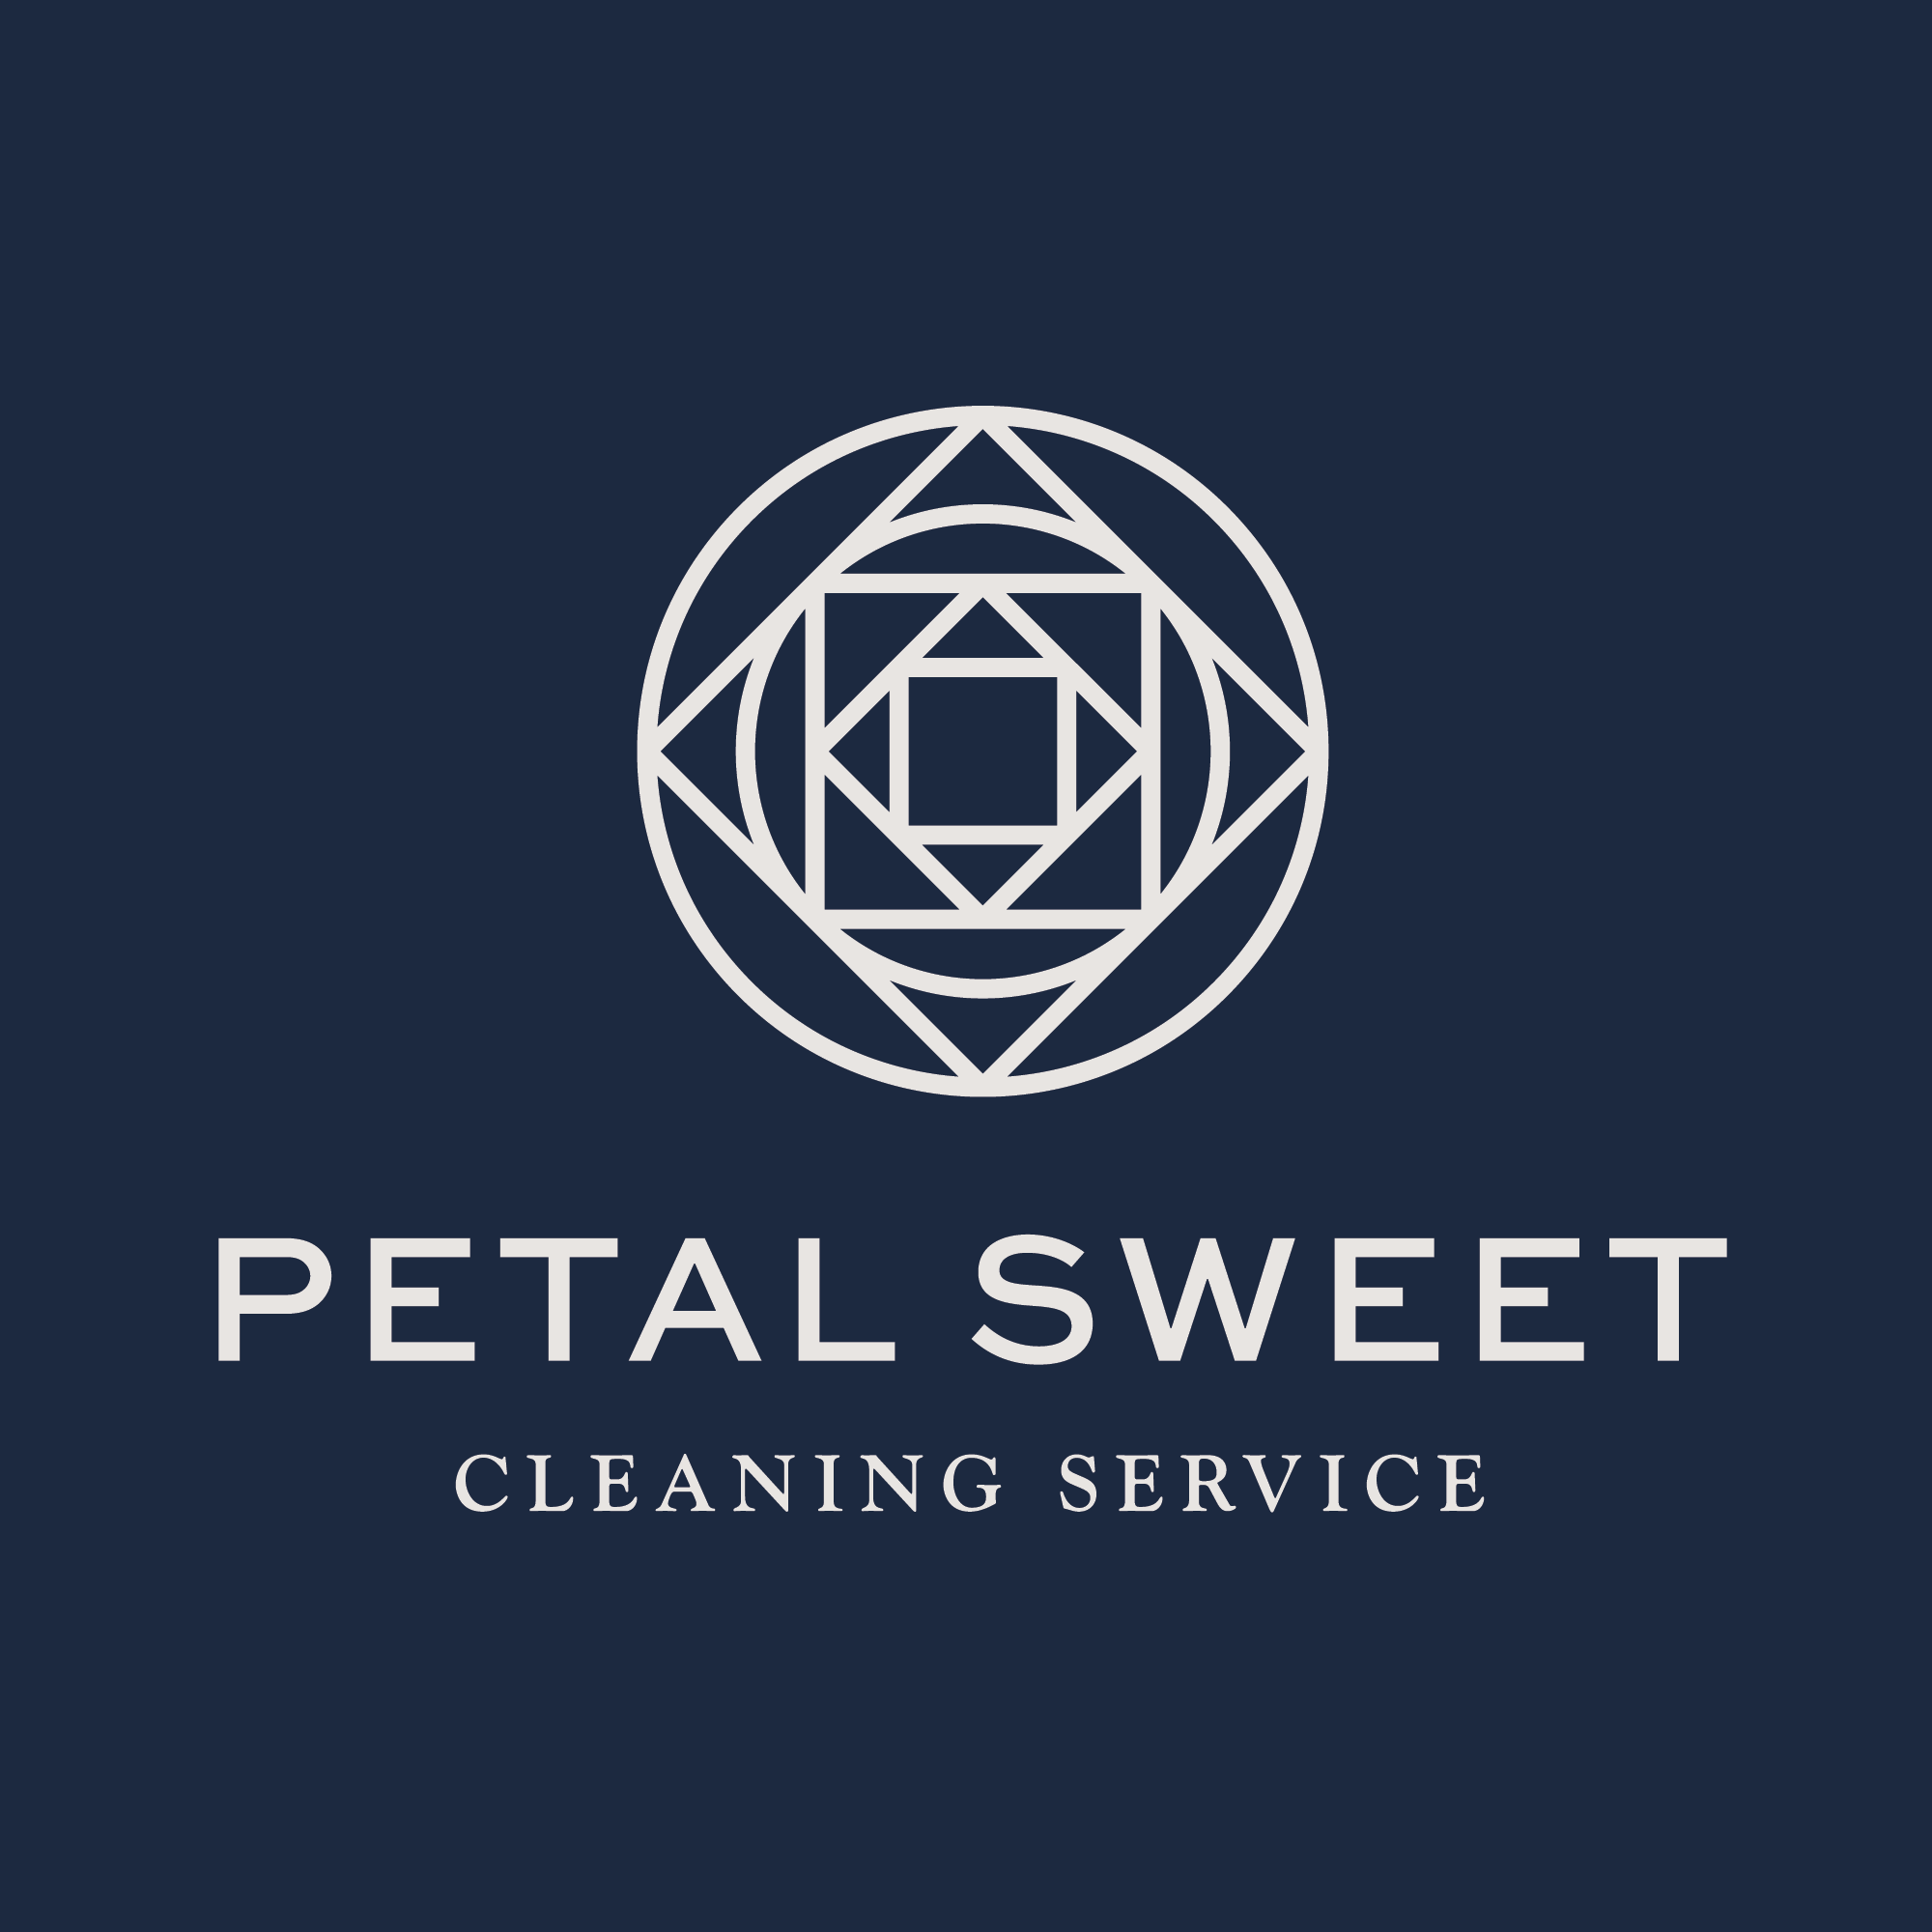 PetalSweet Cleaning Logo